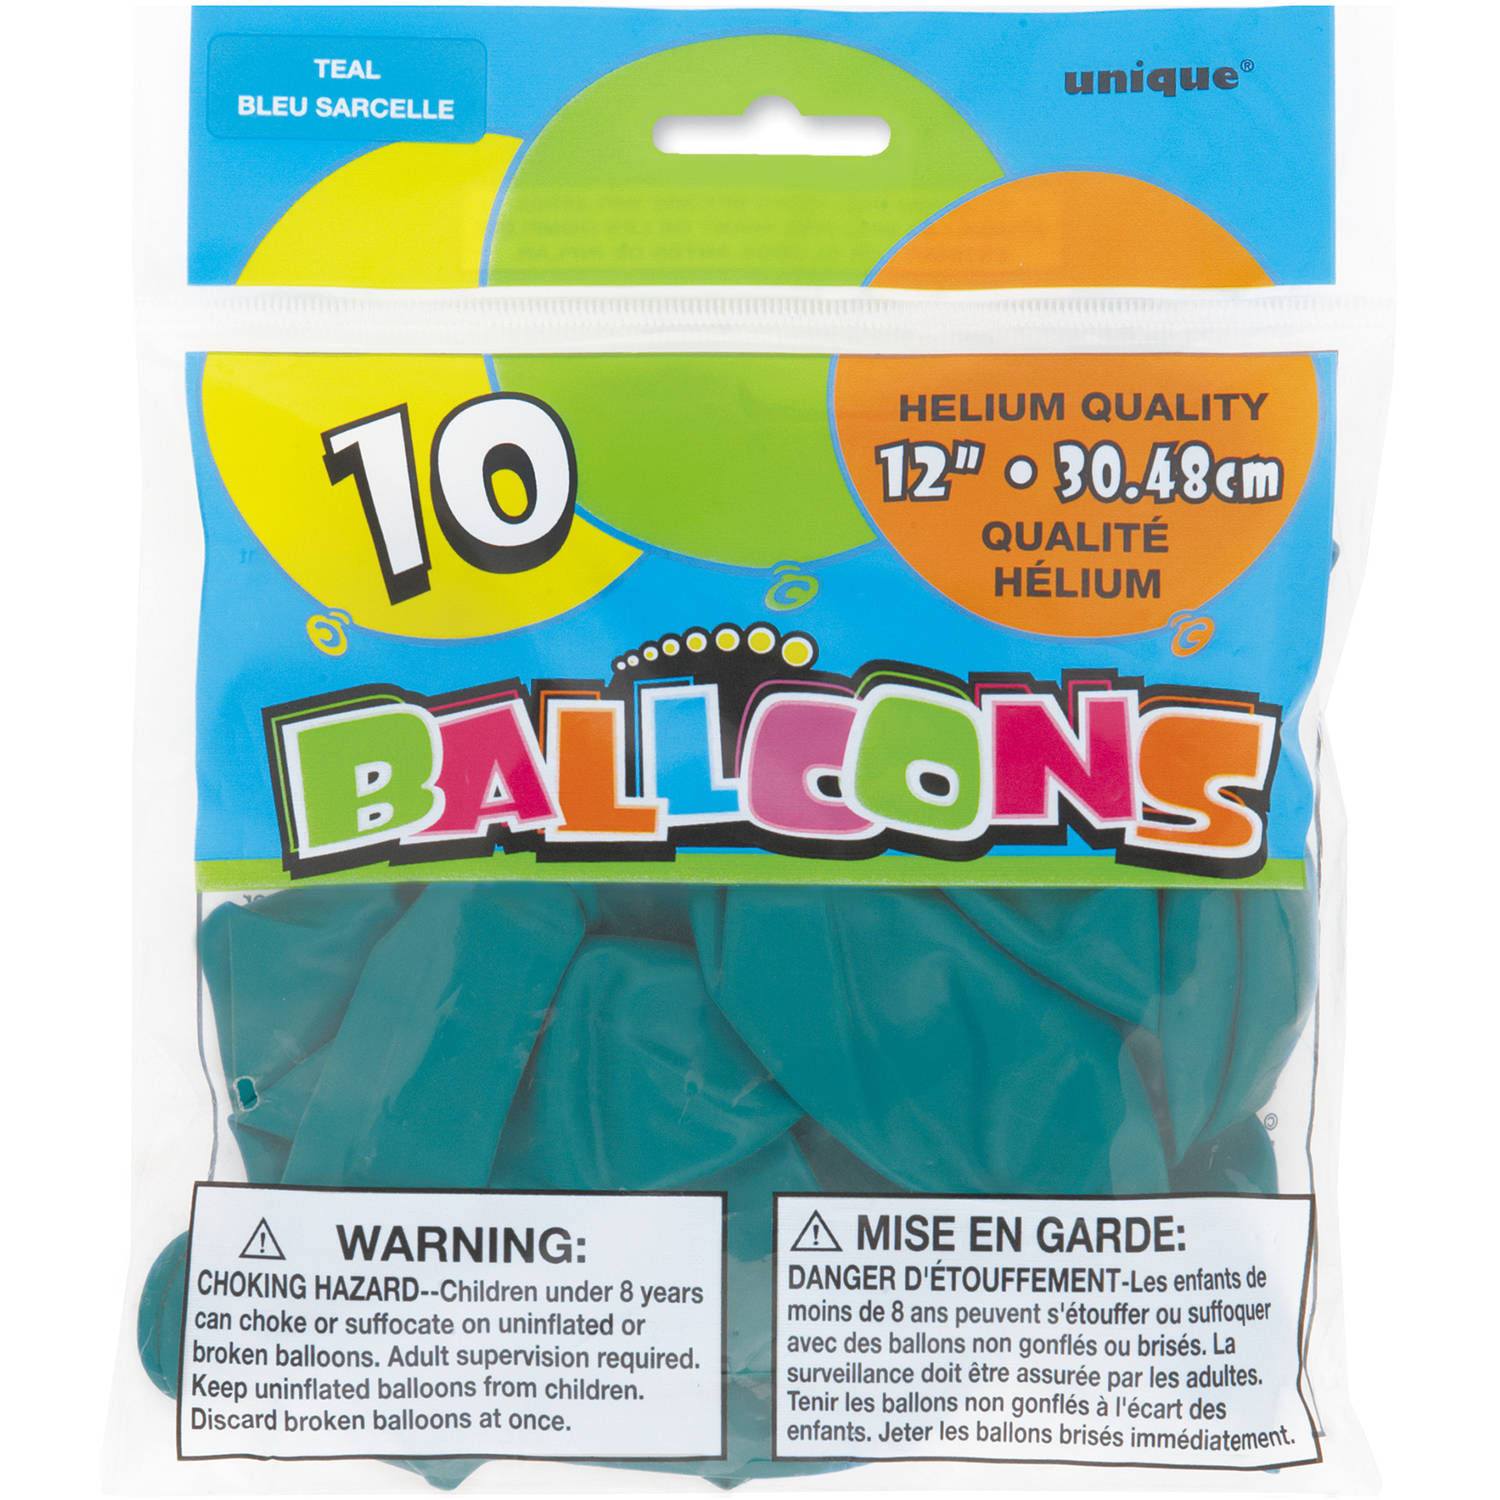 Unique Industries Latex 12" Teal Solid Print Birthday Balloons, 10 Count - image 2 of 2